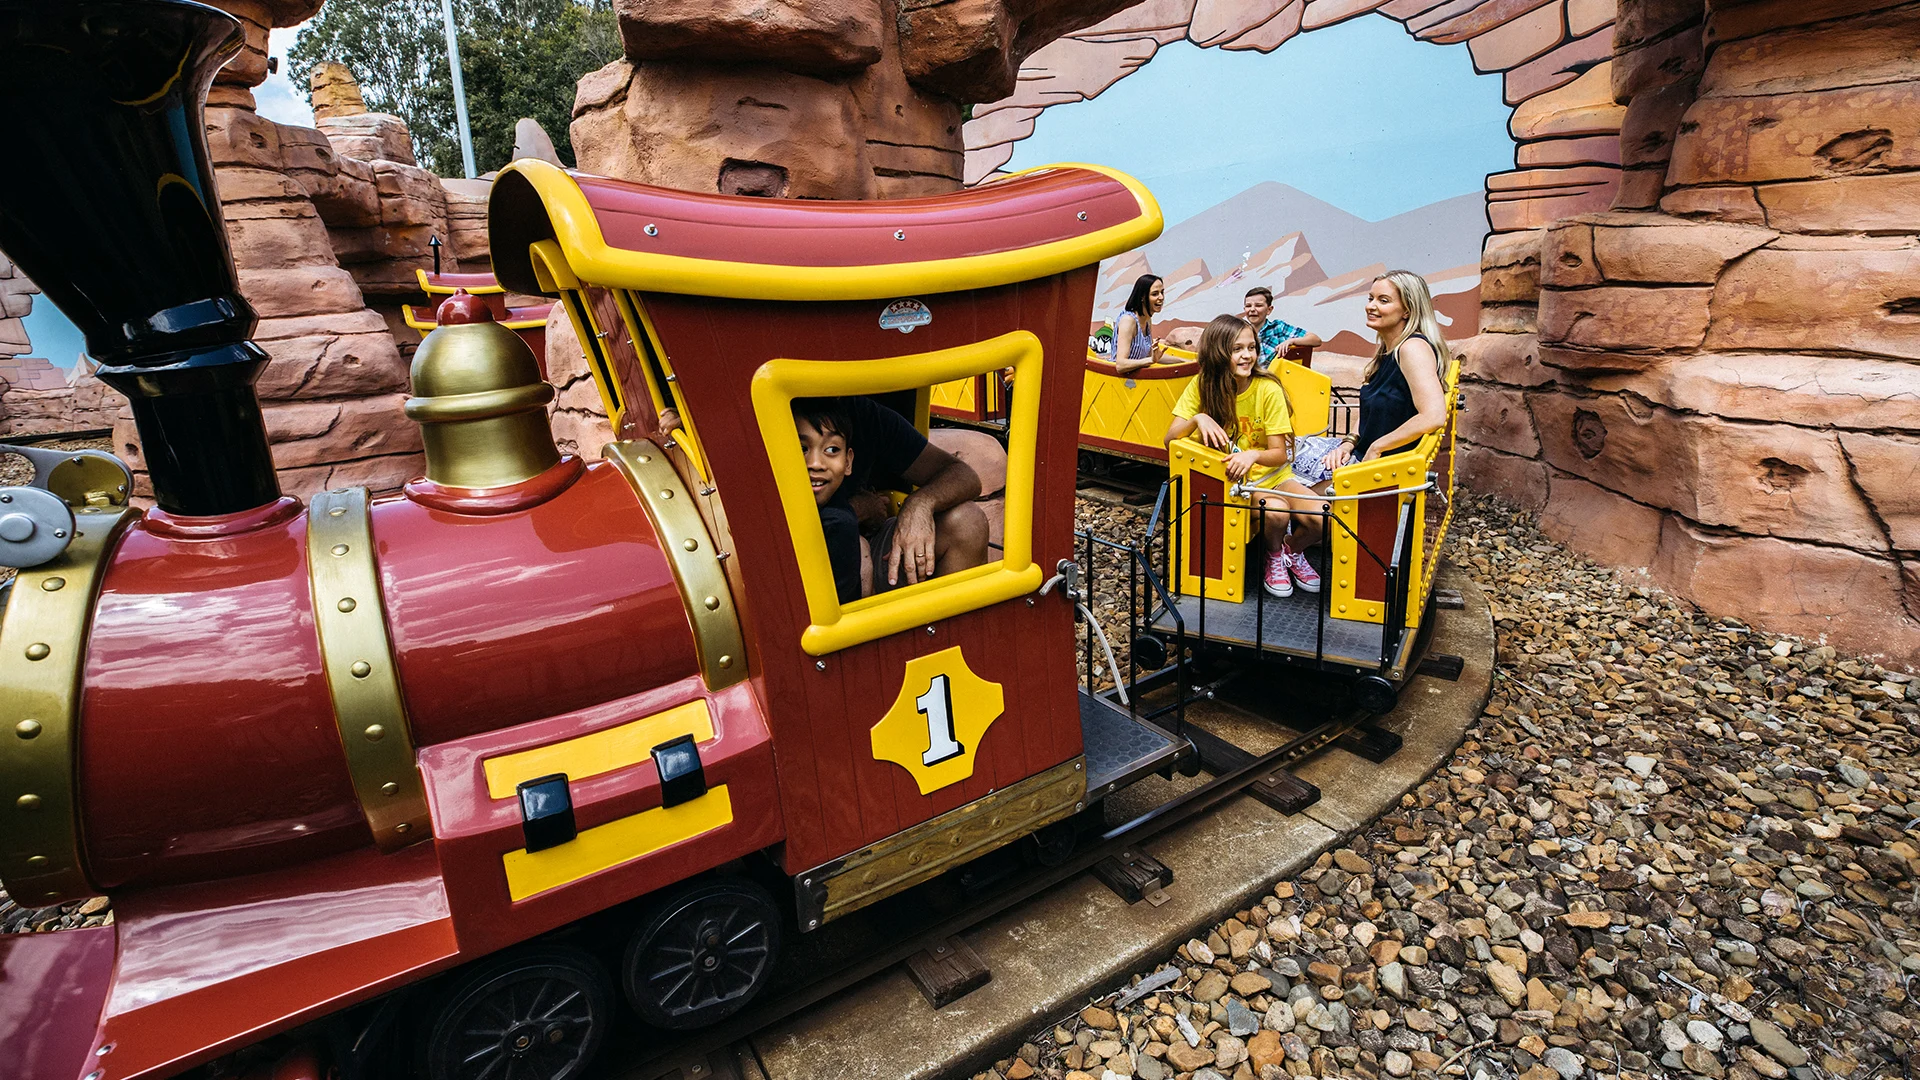 Families happily riding the Yosemite Sam's Railroad kids ride at Warner Bros. Movie World, enjoying a leisurely train adventure through themed landscapes